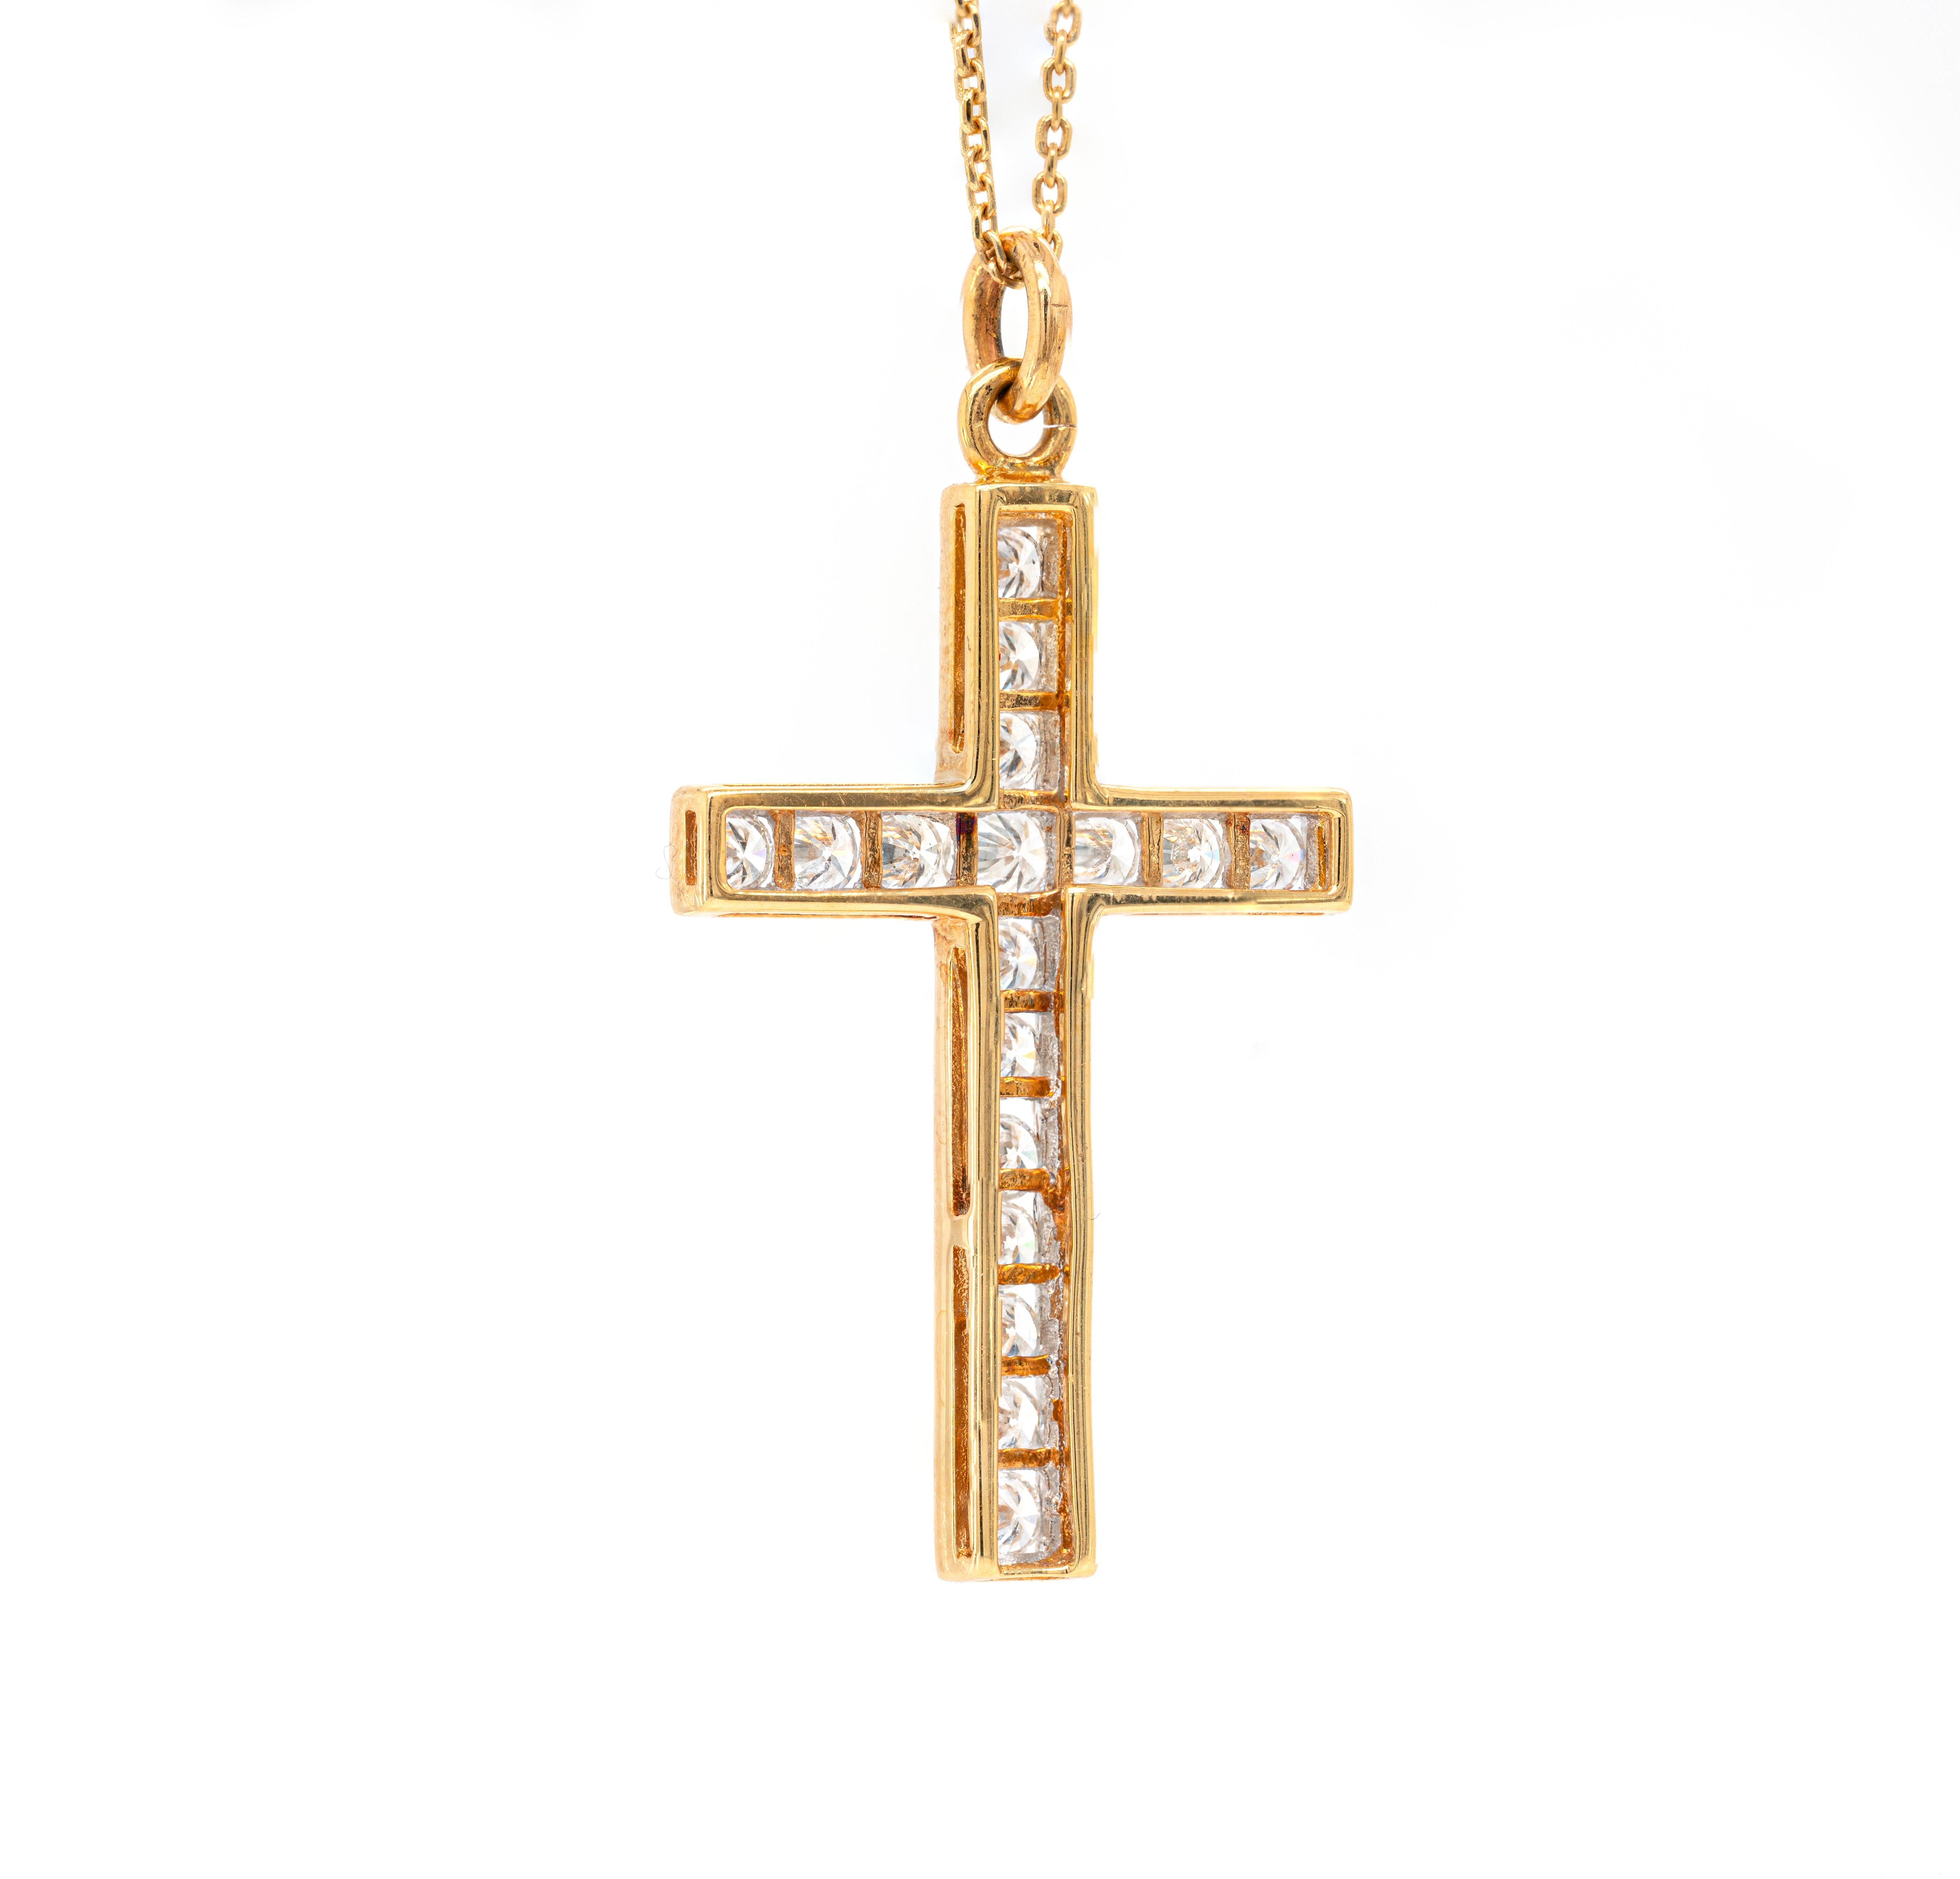 This beautiful and classic cross pendant features 17 fine quality round brilliant cut diamonds with a total approximate combined weight of 1.50ct, all channel set in a 18 carat yellow gold mount. The gorgeous pendant measures 4.0 x 2.2 cm and has a